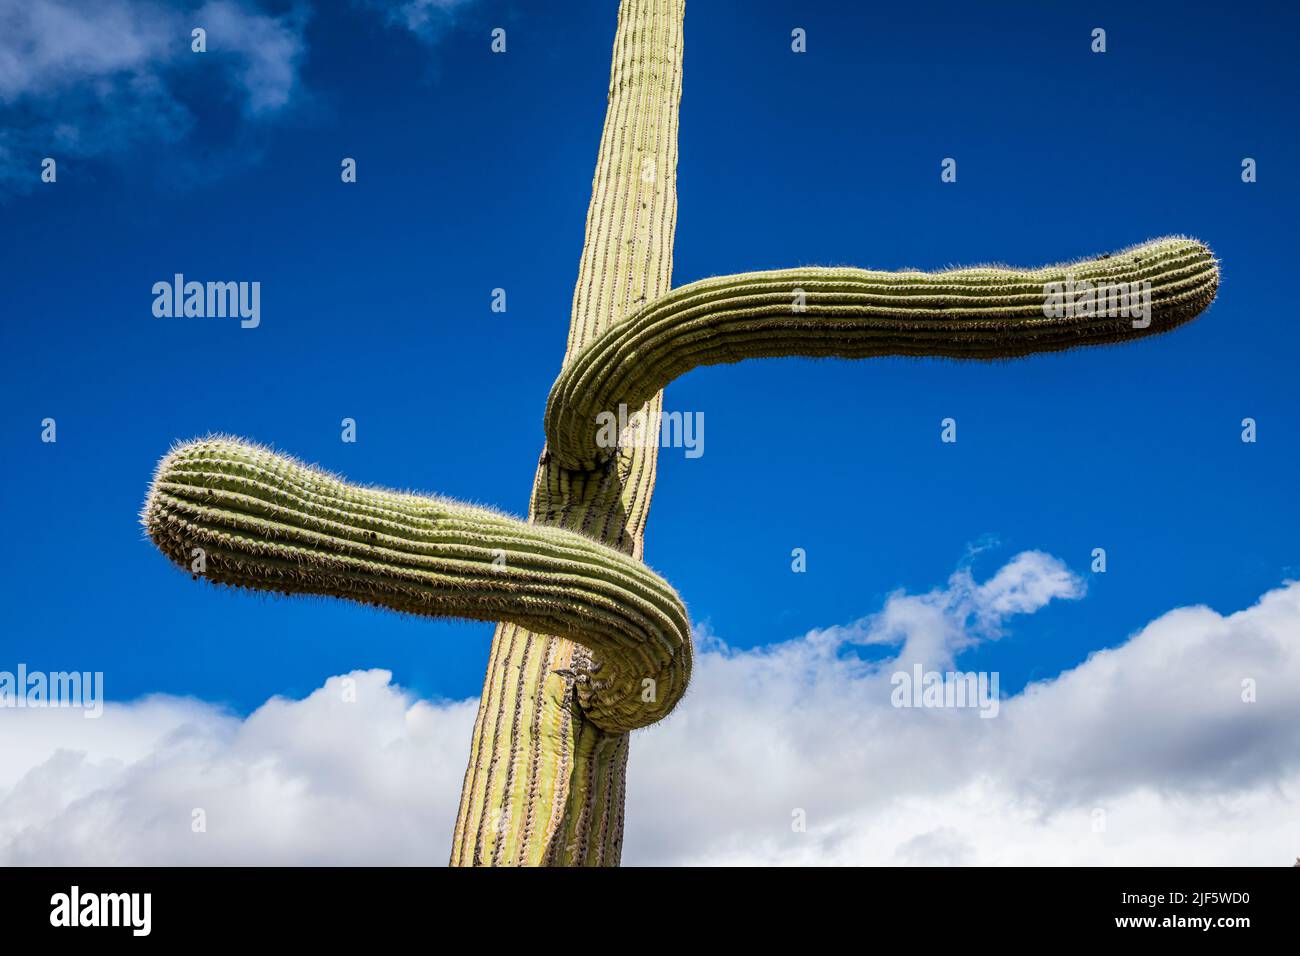 A Saguaro cactus with arms going in opposite odd directions, Sabino Canyon Recreation Area, Arizona. Stock Photo